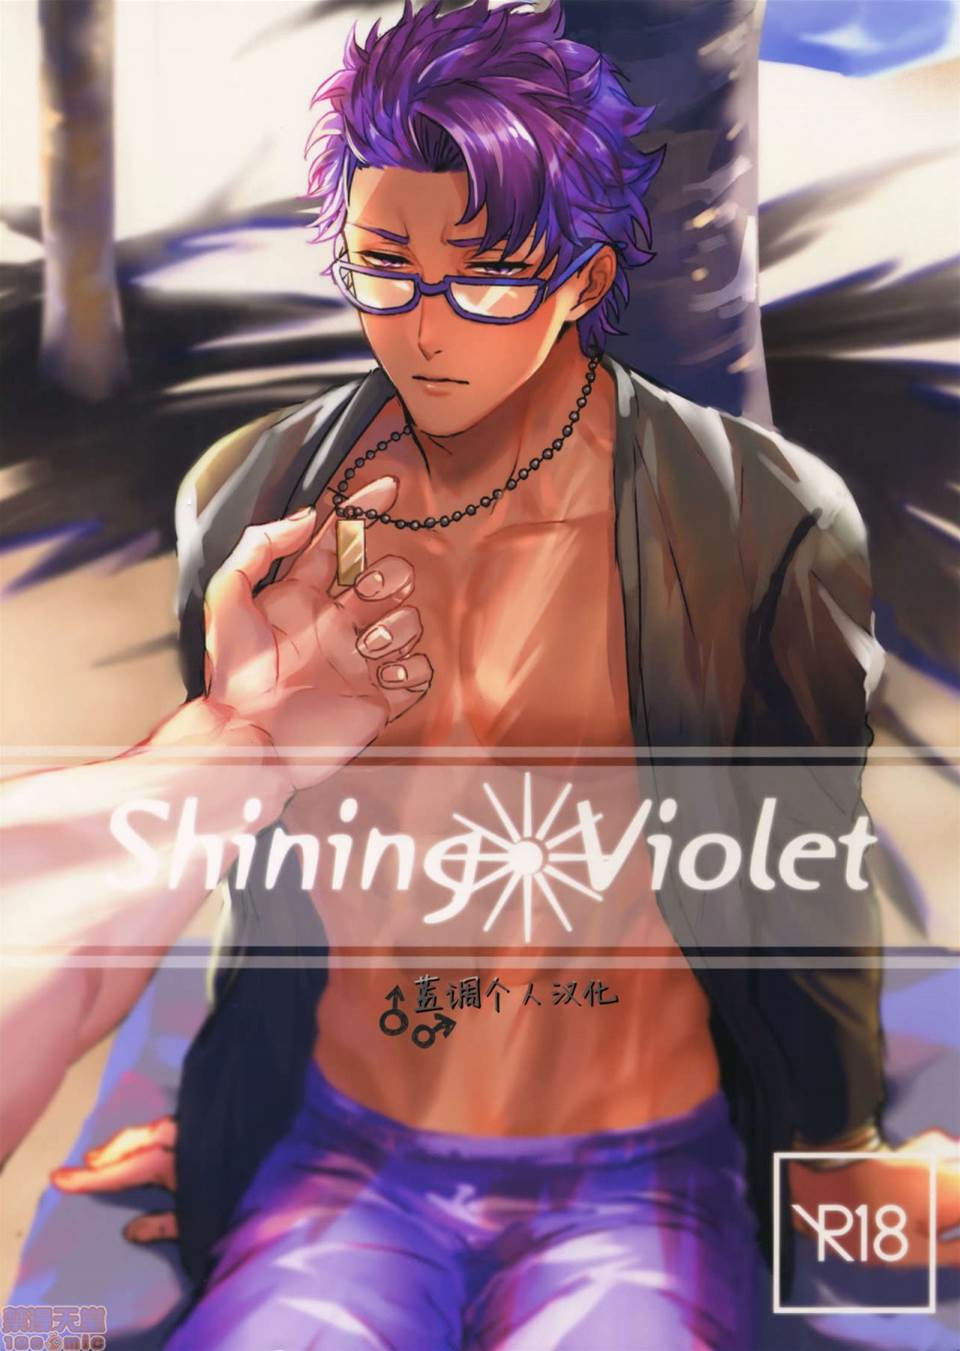 Shining Violet (Fate/Grand Order) ,Shining Violet (Fate/Grand Order) 漫画